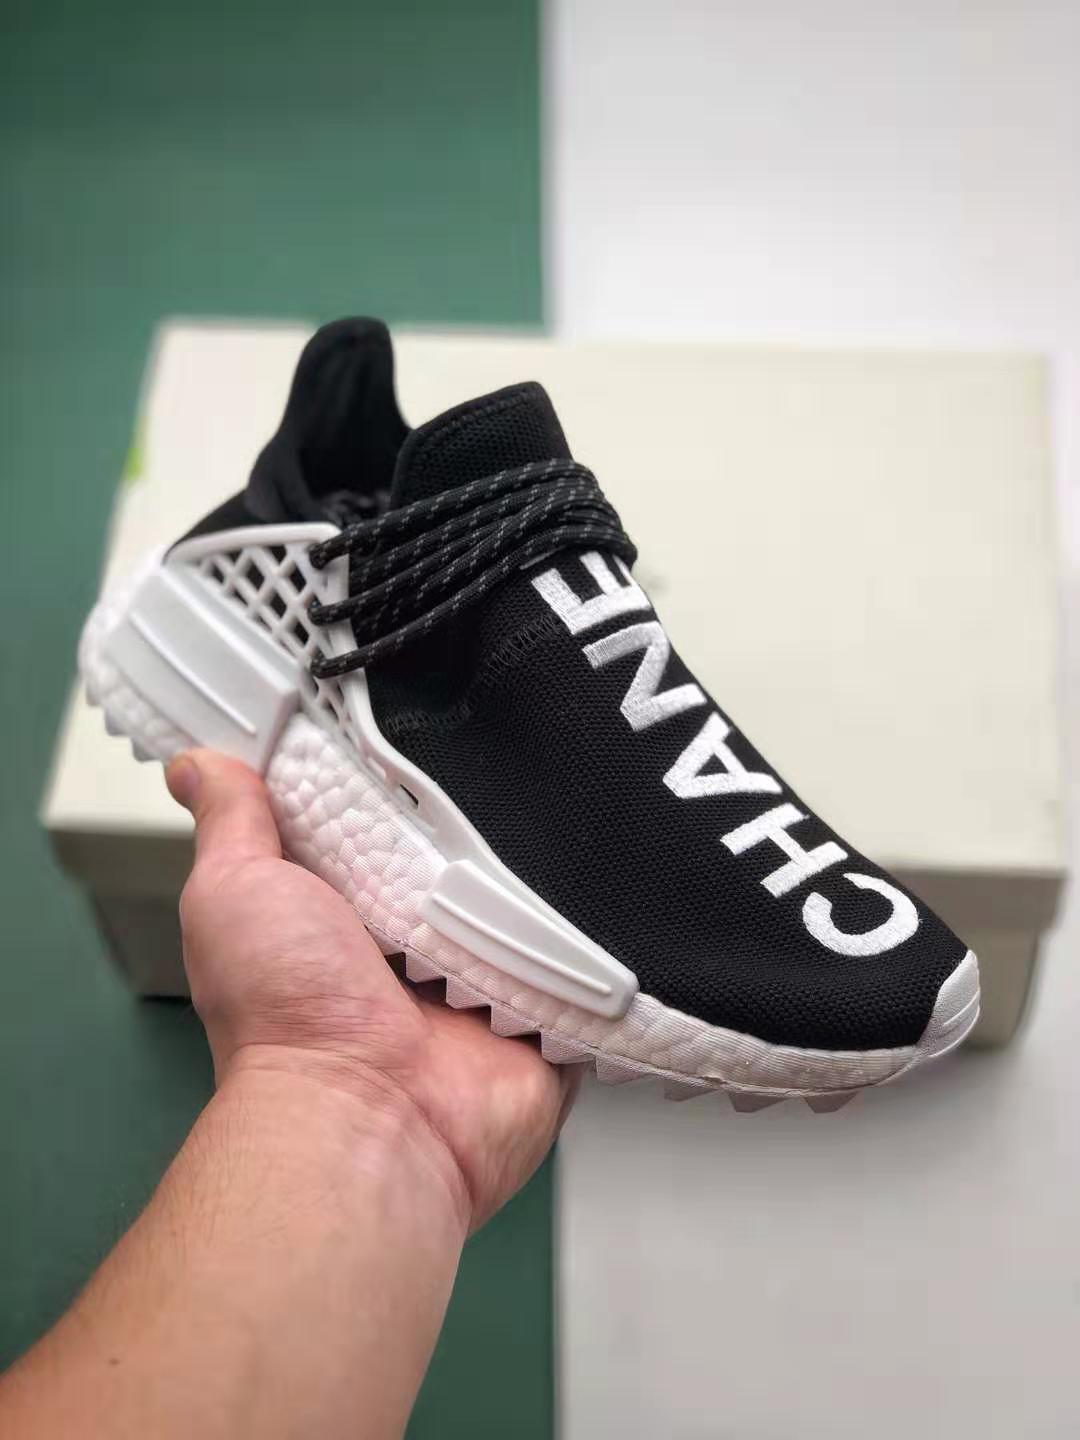 Adidas Pharrell x NMD Human Race Trail 'Equality' AC7033 - Exclusive Release